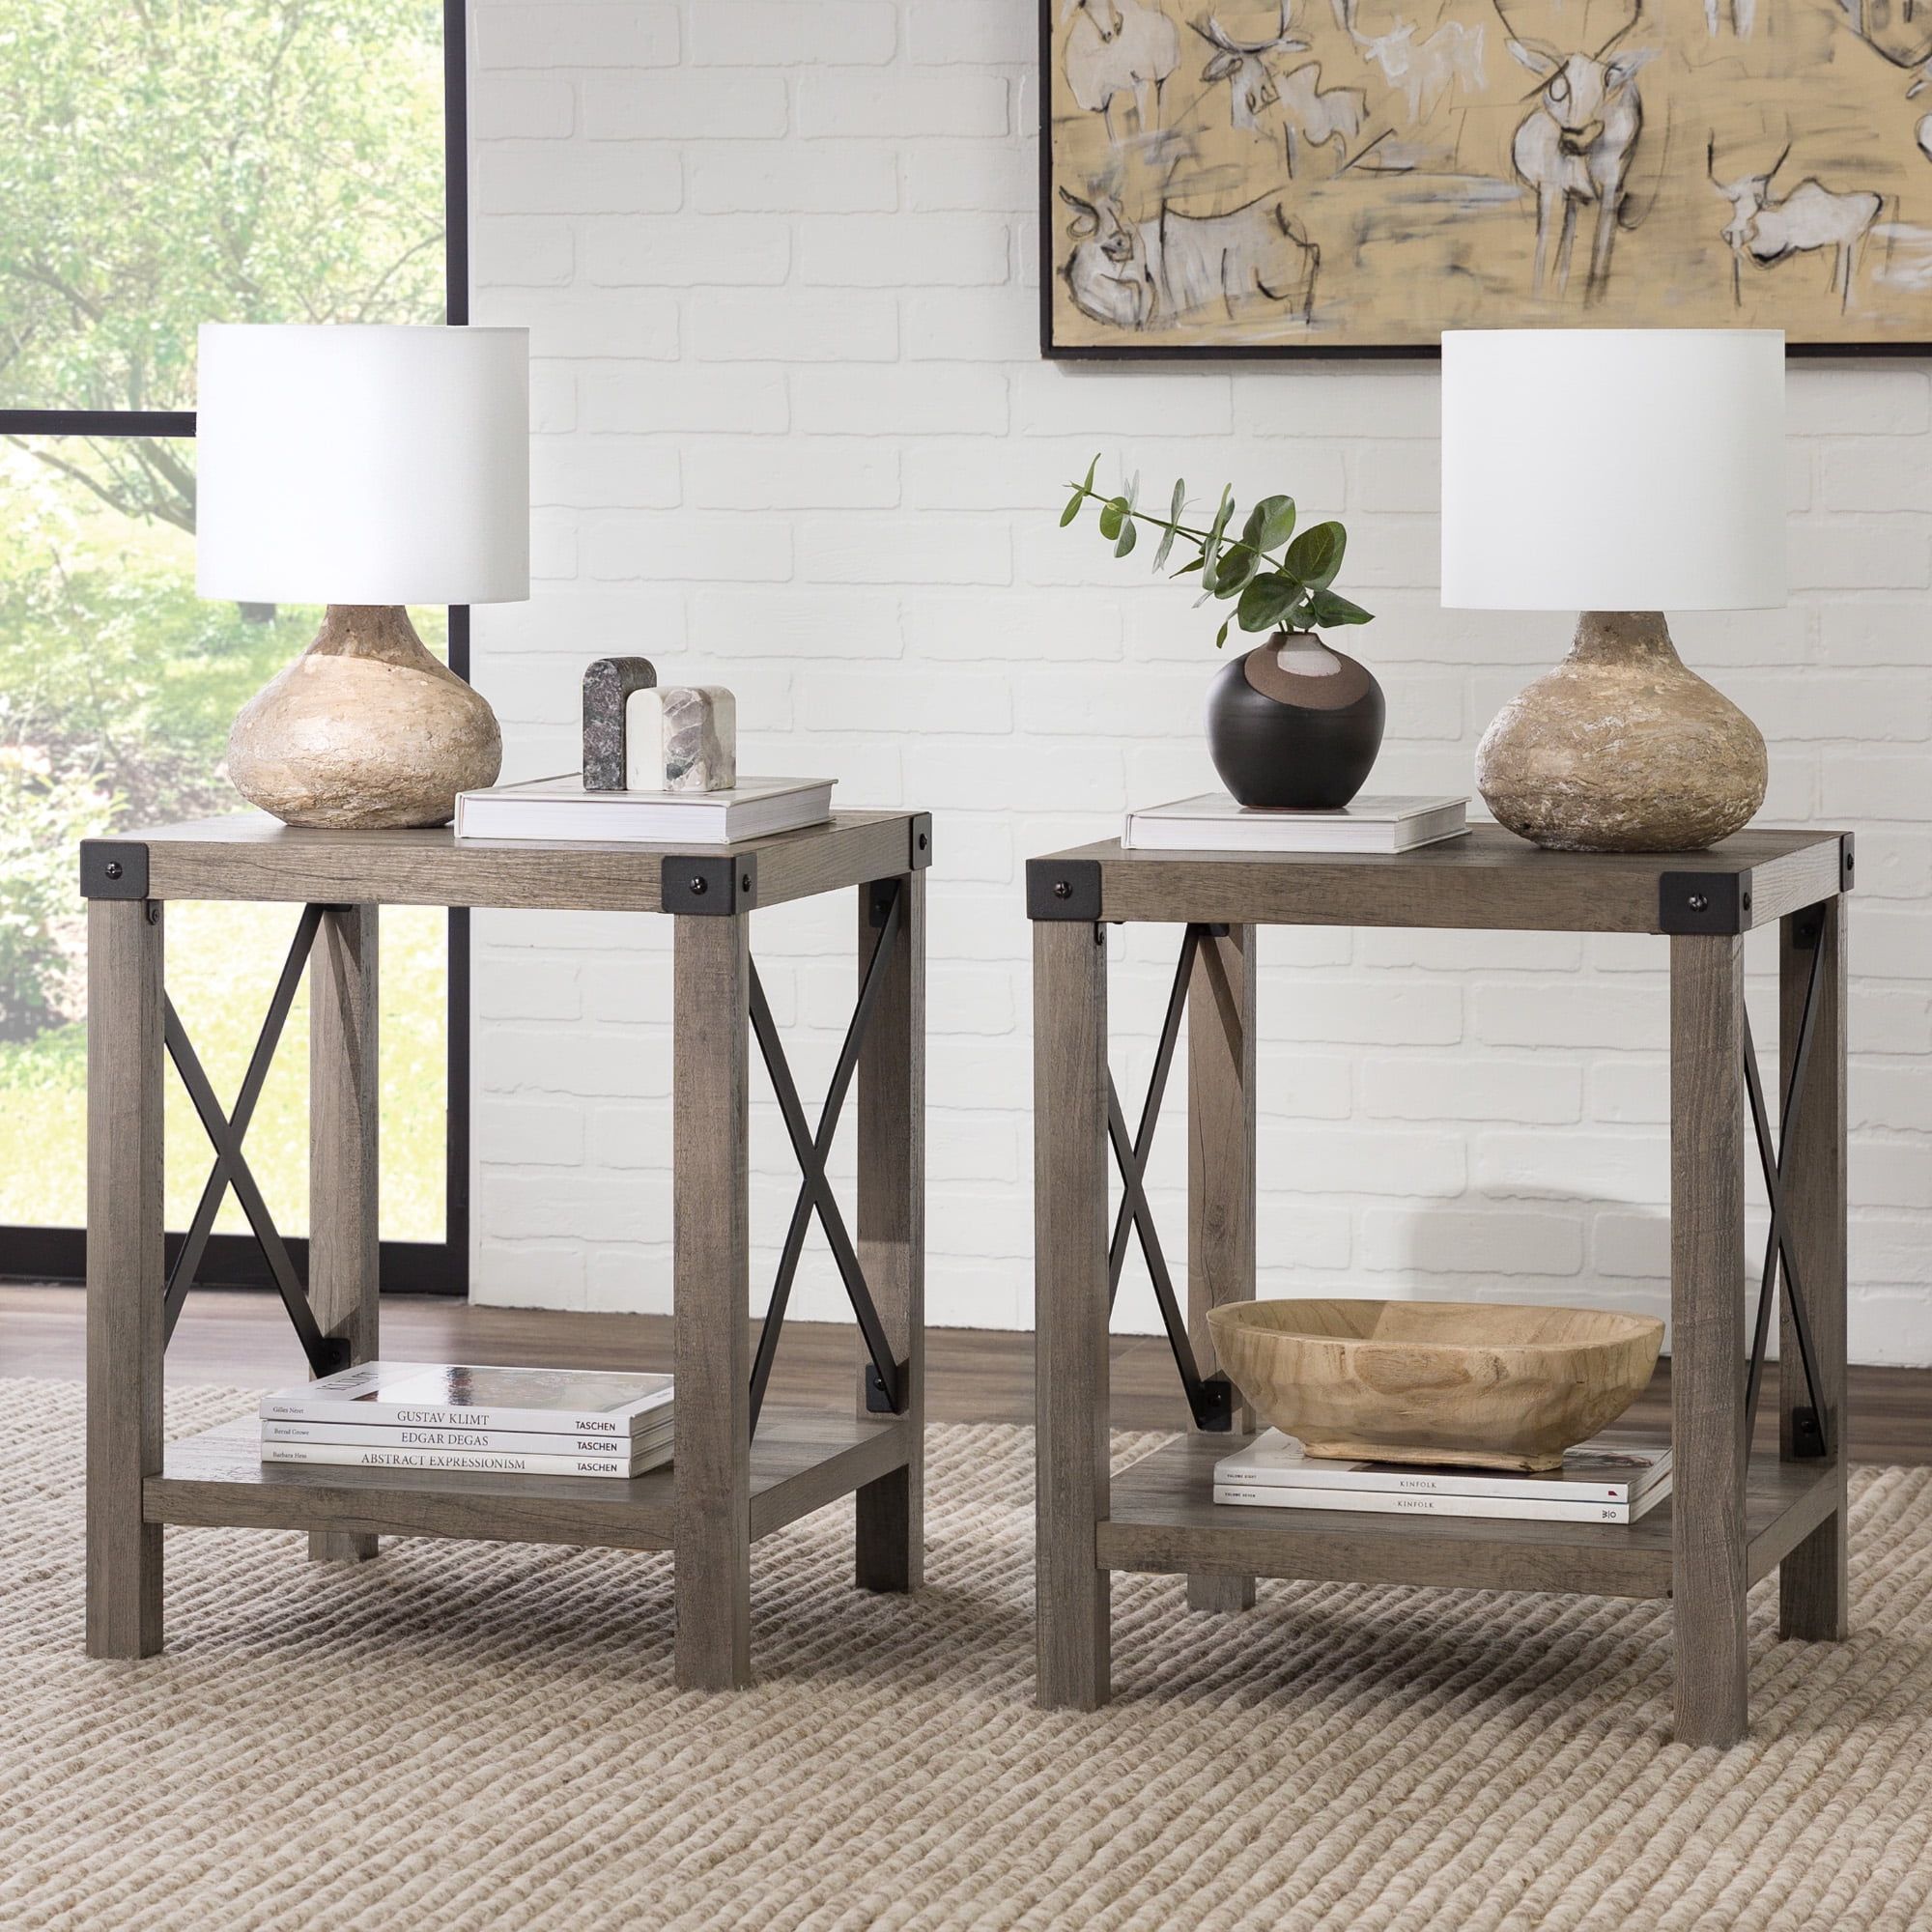 Woven Paths Magnolia Metal X Set Of 2 End Tables, Grey Wash – Walmart Intended For Rustic Gray End Tables (View 6 of 15)